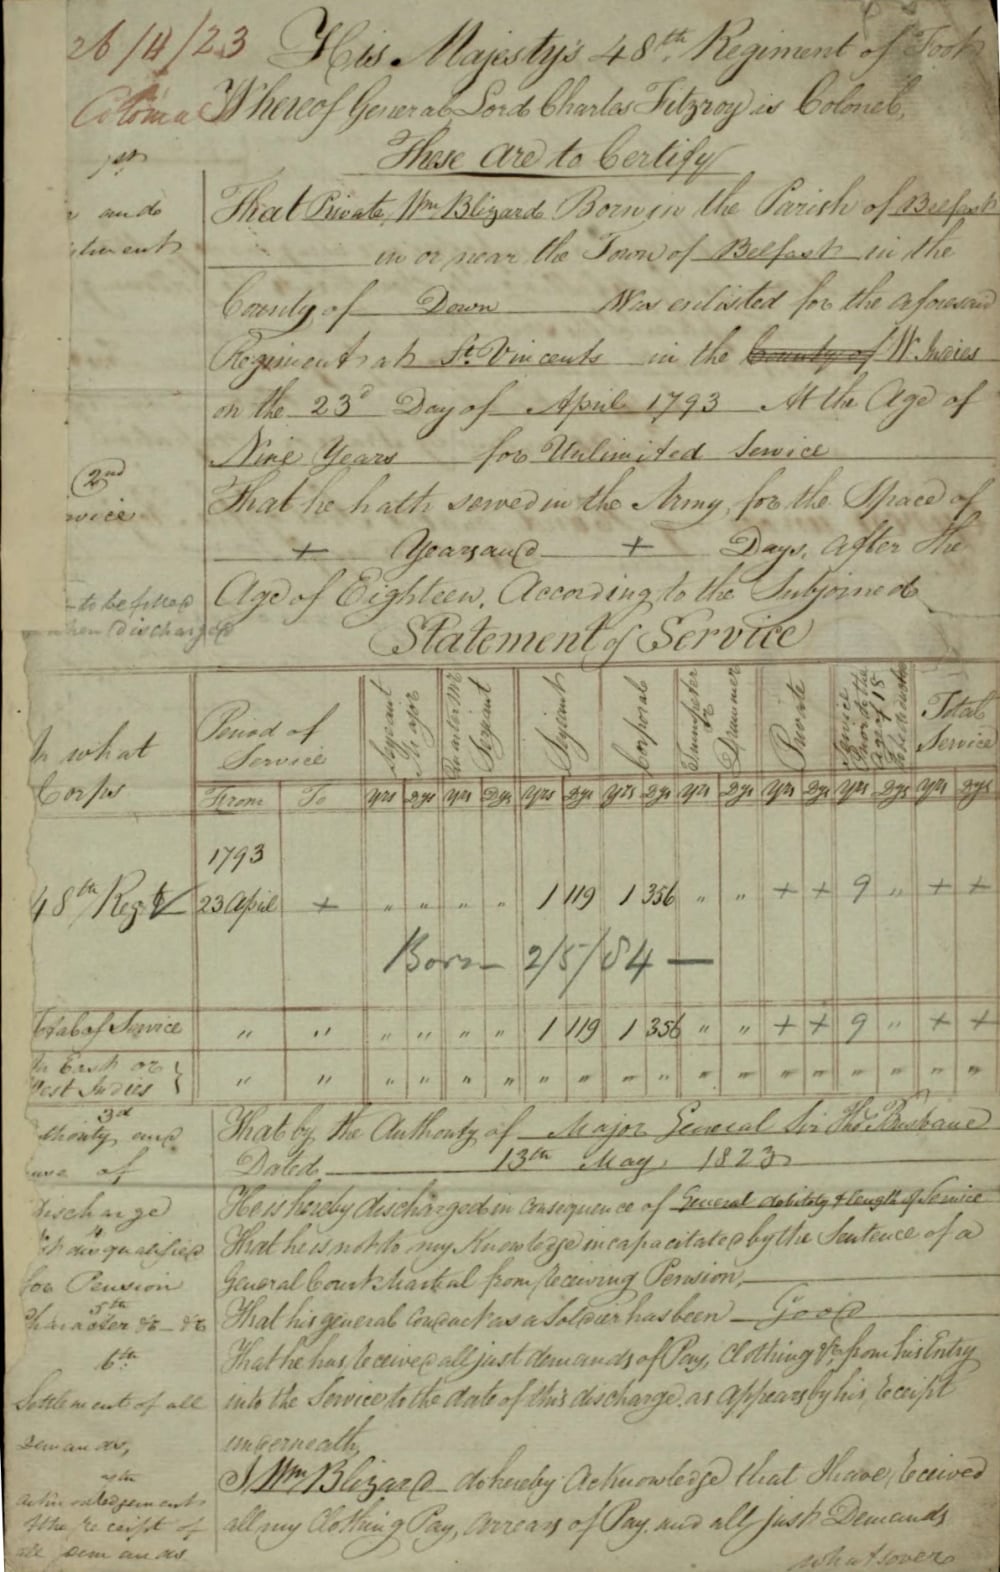 Discharge, William Blizzard, Sydney, 25 June 1823; UK National Archives, WO 96/622/46/1